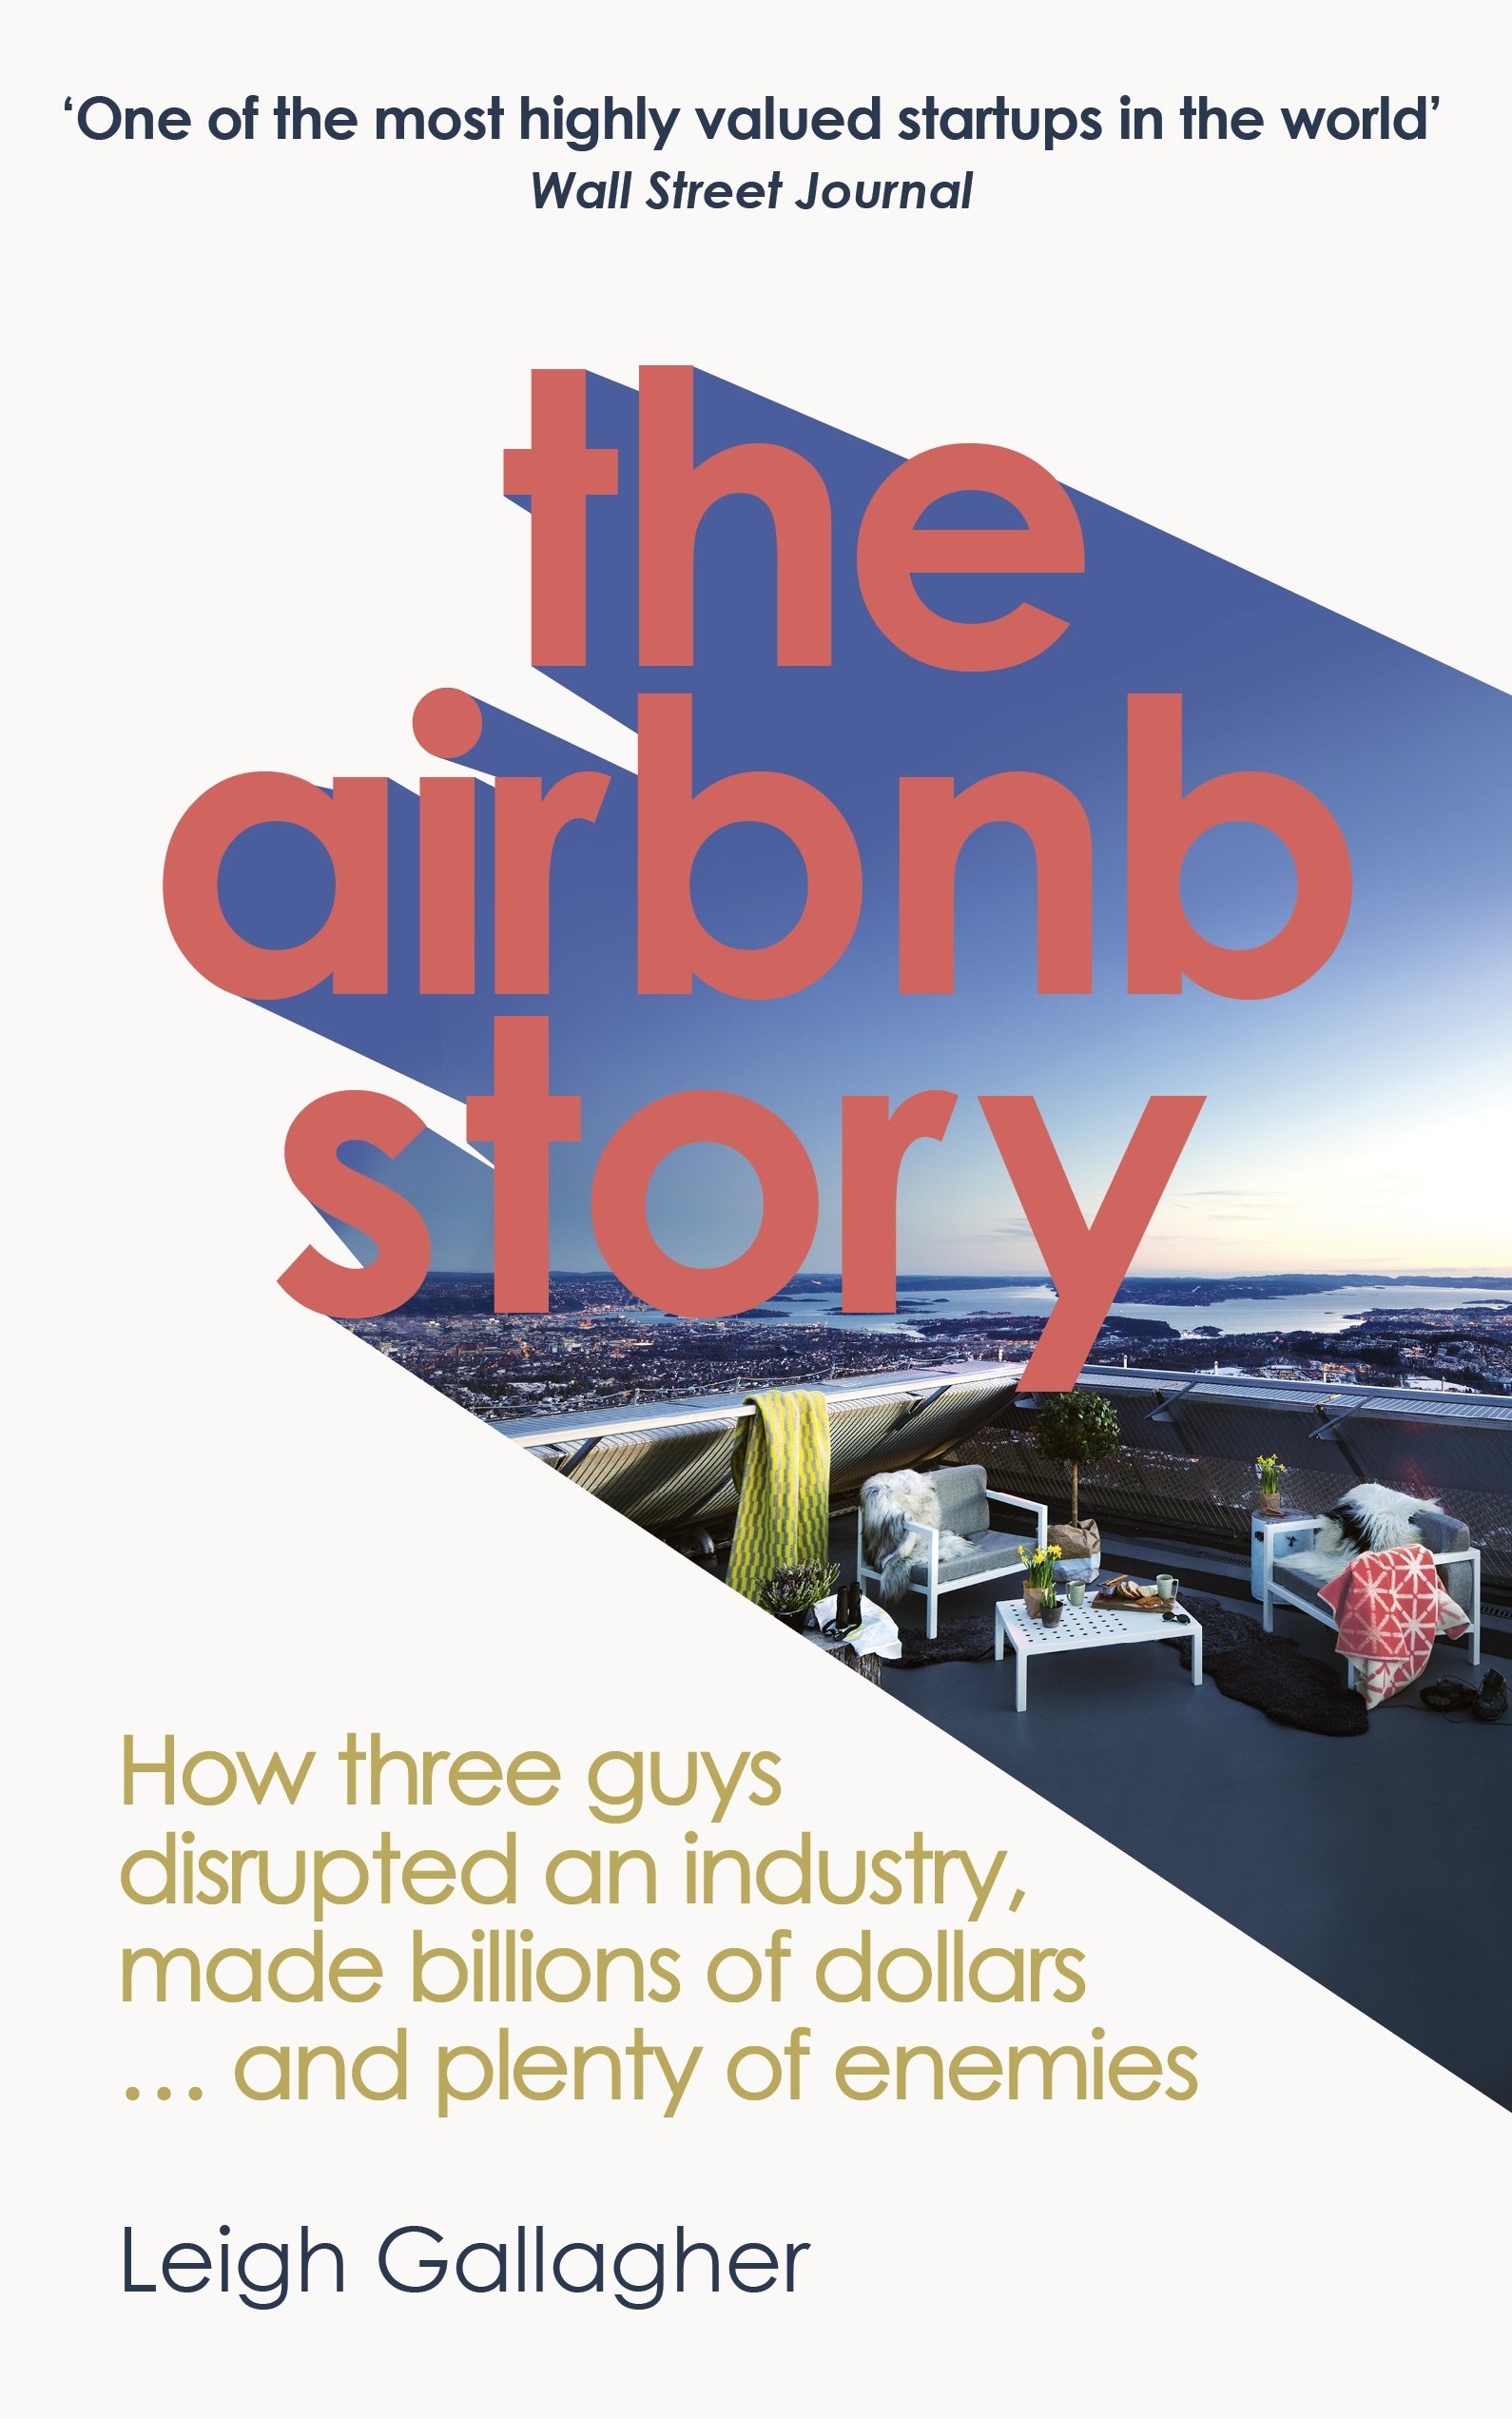 Airbnb Story, The